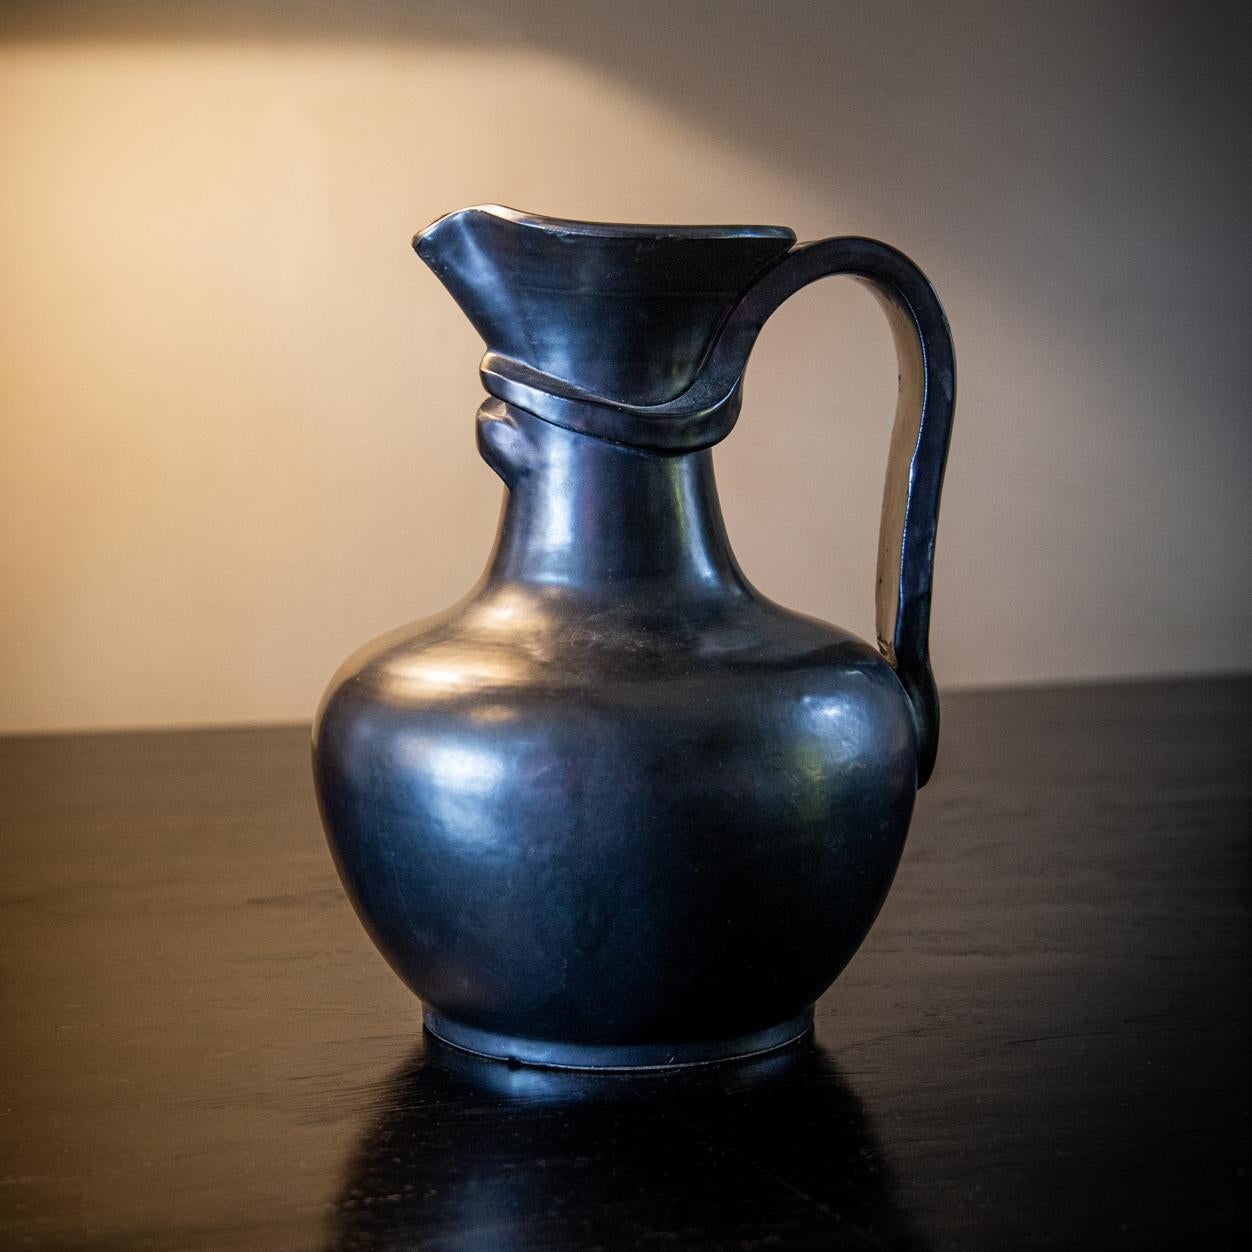 Wonderful form and silhouette with looped candle extending around the spout, reminiscent of the work of Georges Jouves. Ideal vintage condition and patina, signed to base.